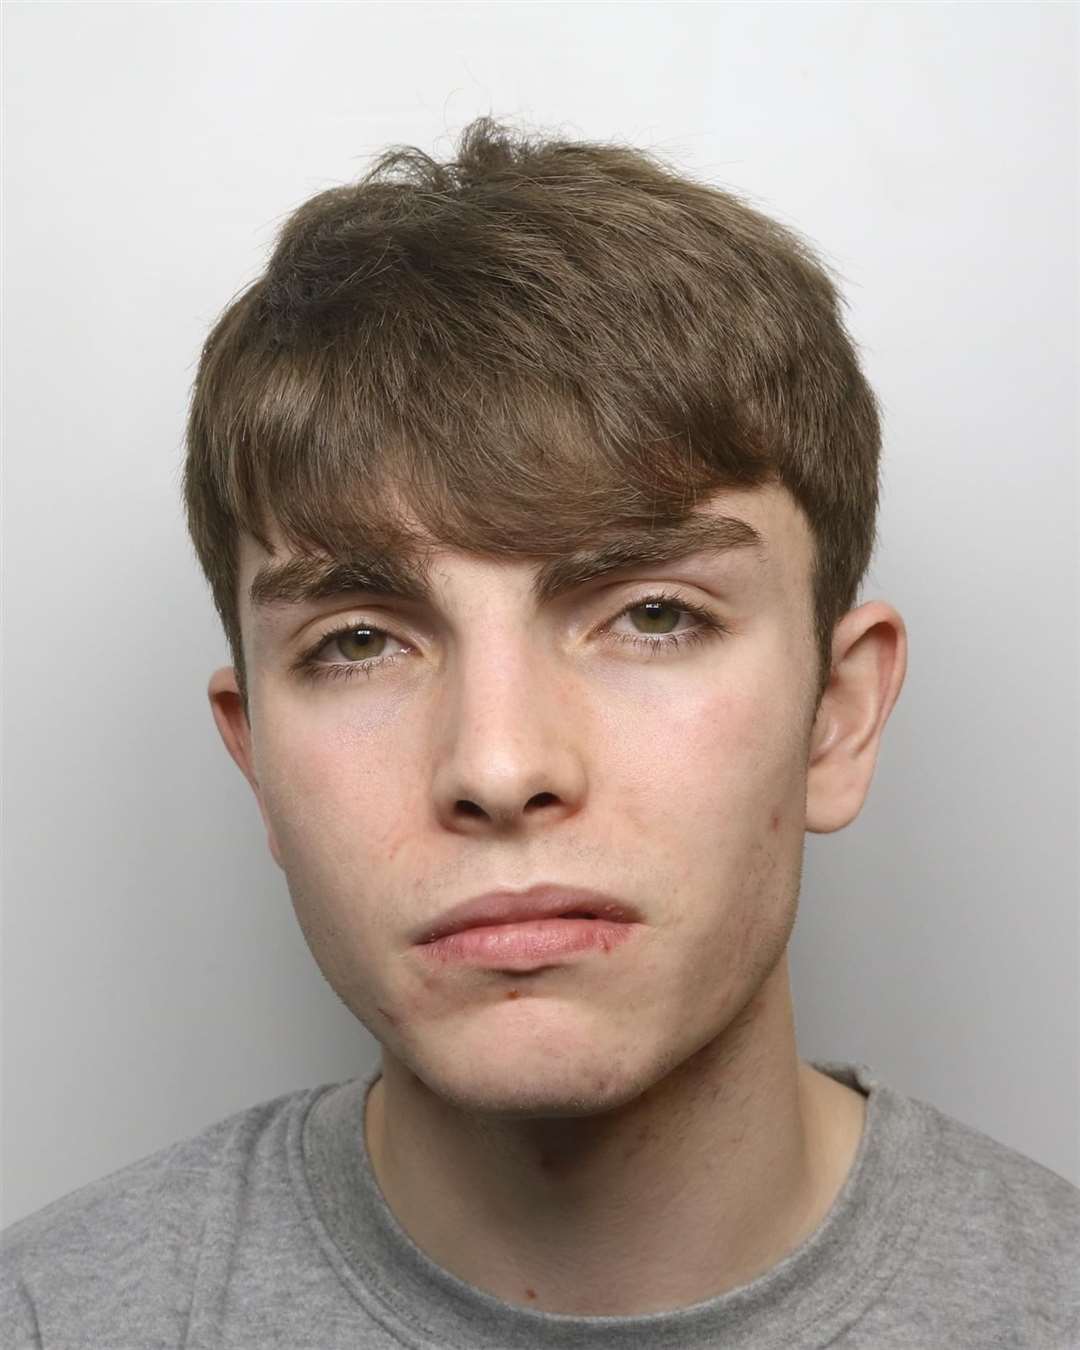 Thomas Griffiths was 17 when he murdered schoolgirl Ellie Gould in Calne, Wiltshire (Wiltshire Police/PA)